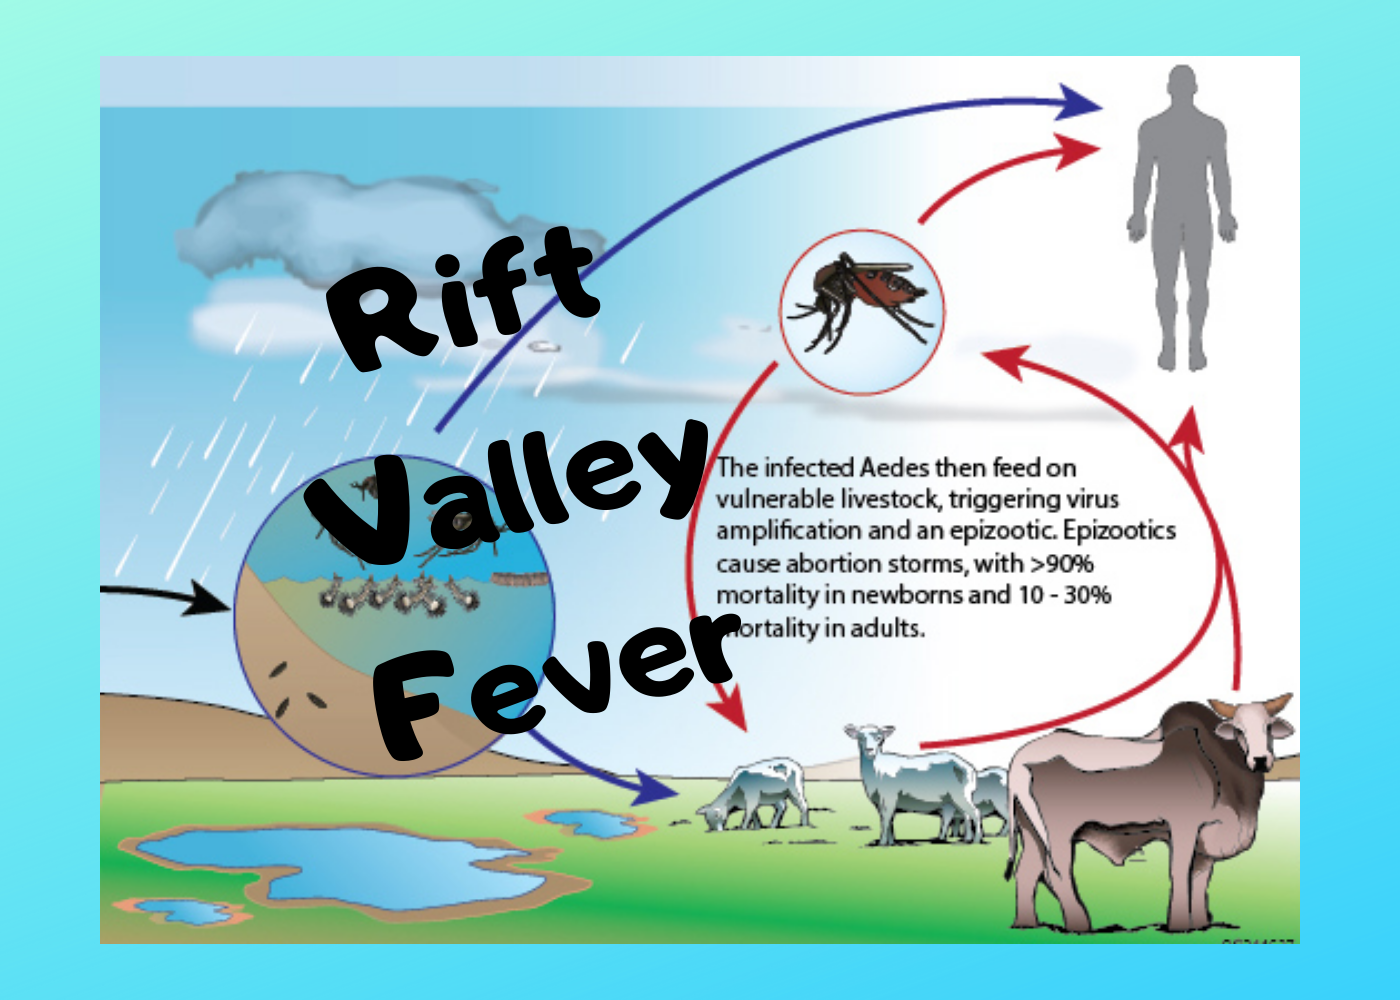 Mauritania Rift Valley fever outbreak update - Outbreak News Today